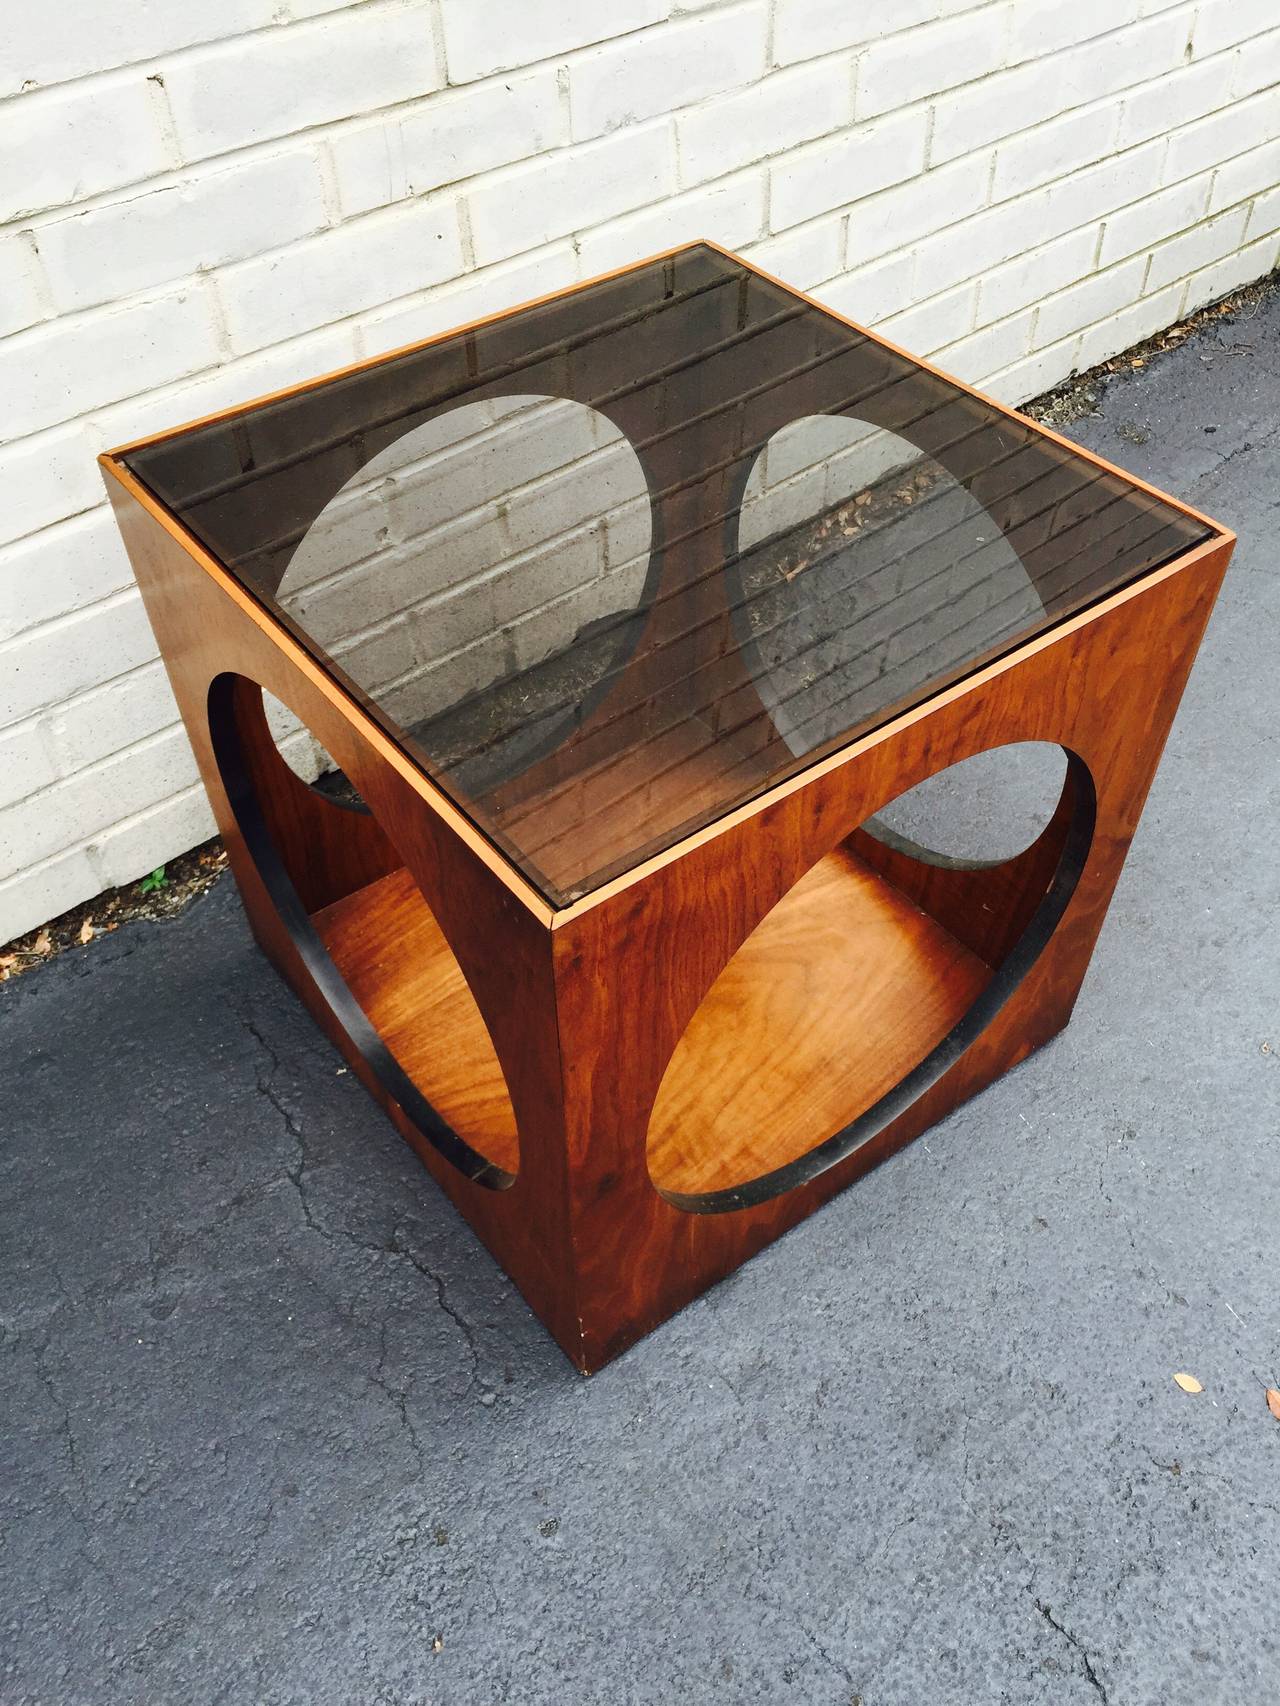 Terrific Mid-Century sculptural cube table by Lane. This interesting design is comprised of a walnut wood cube with circular cut-out on each side and tinted glass top. Great to display items inside and in top.